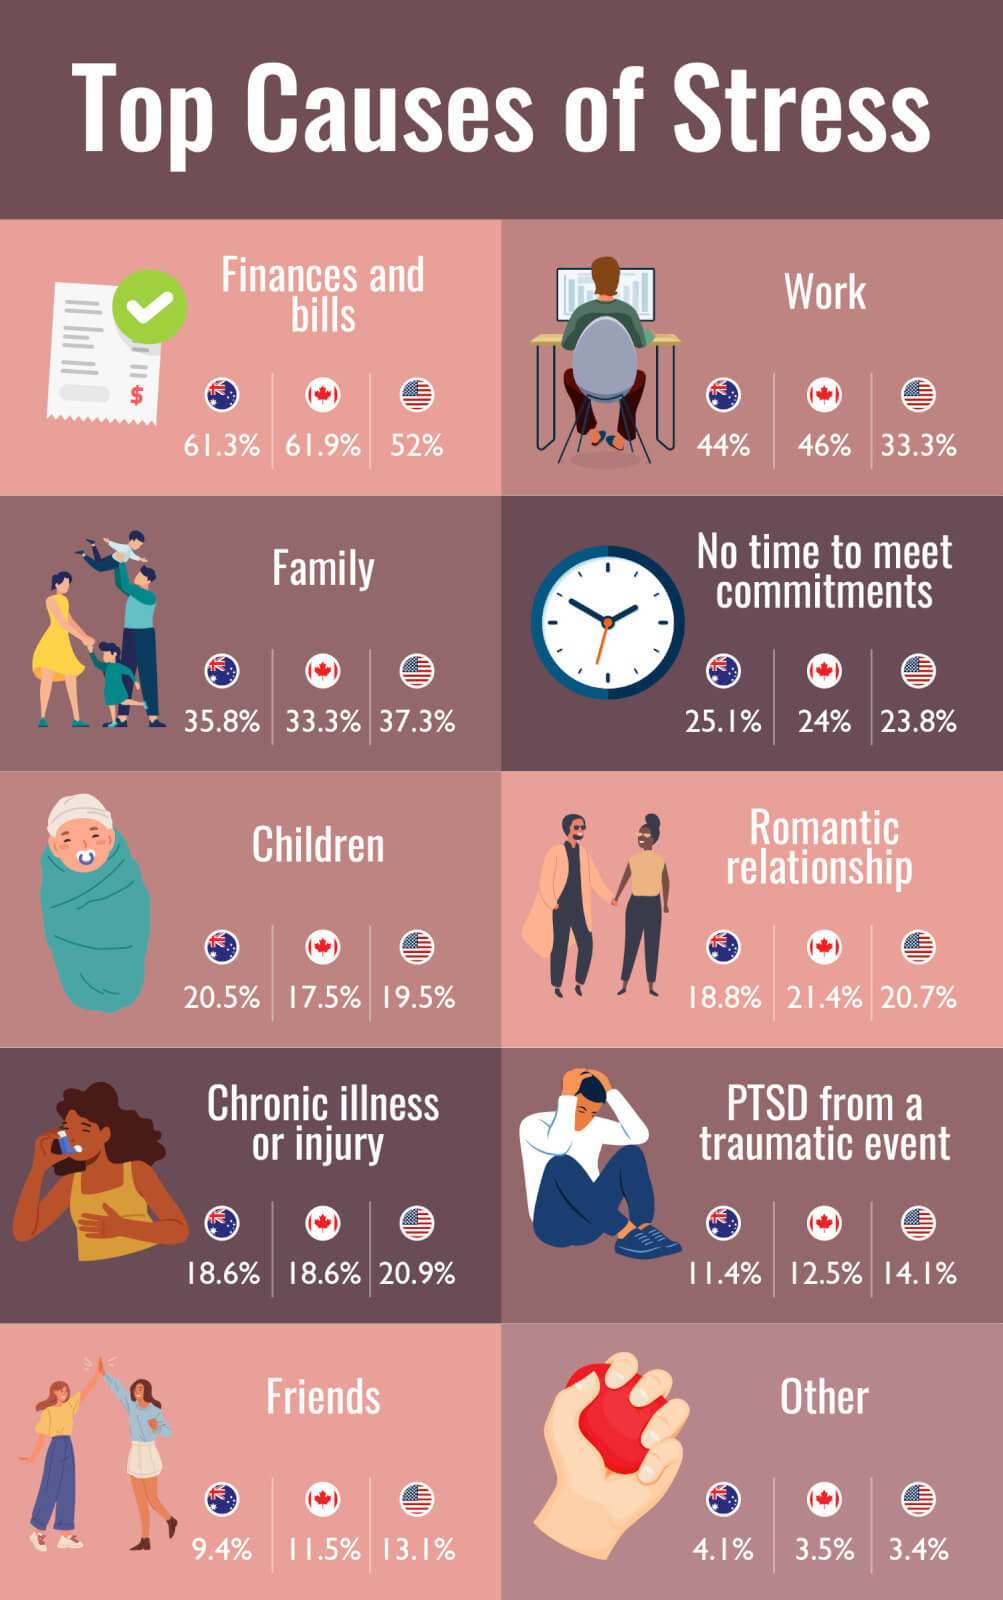 An infographic of the top causes of stress from a Compare the Market survey of Australian, Canadian and American adults